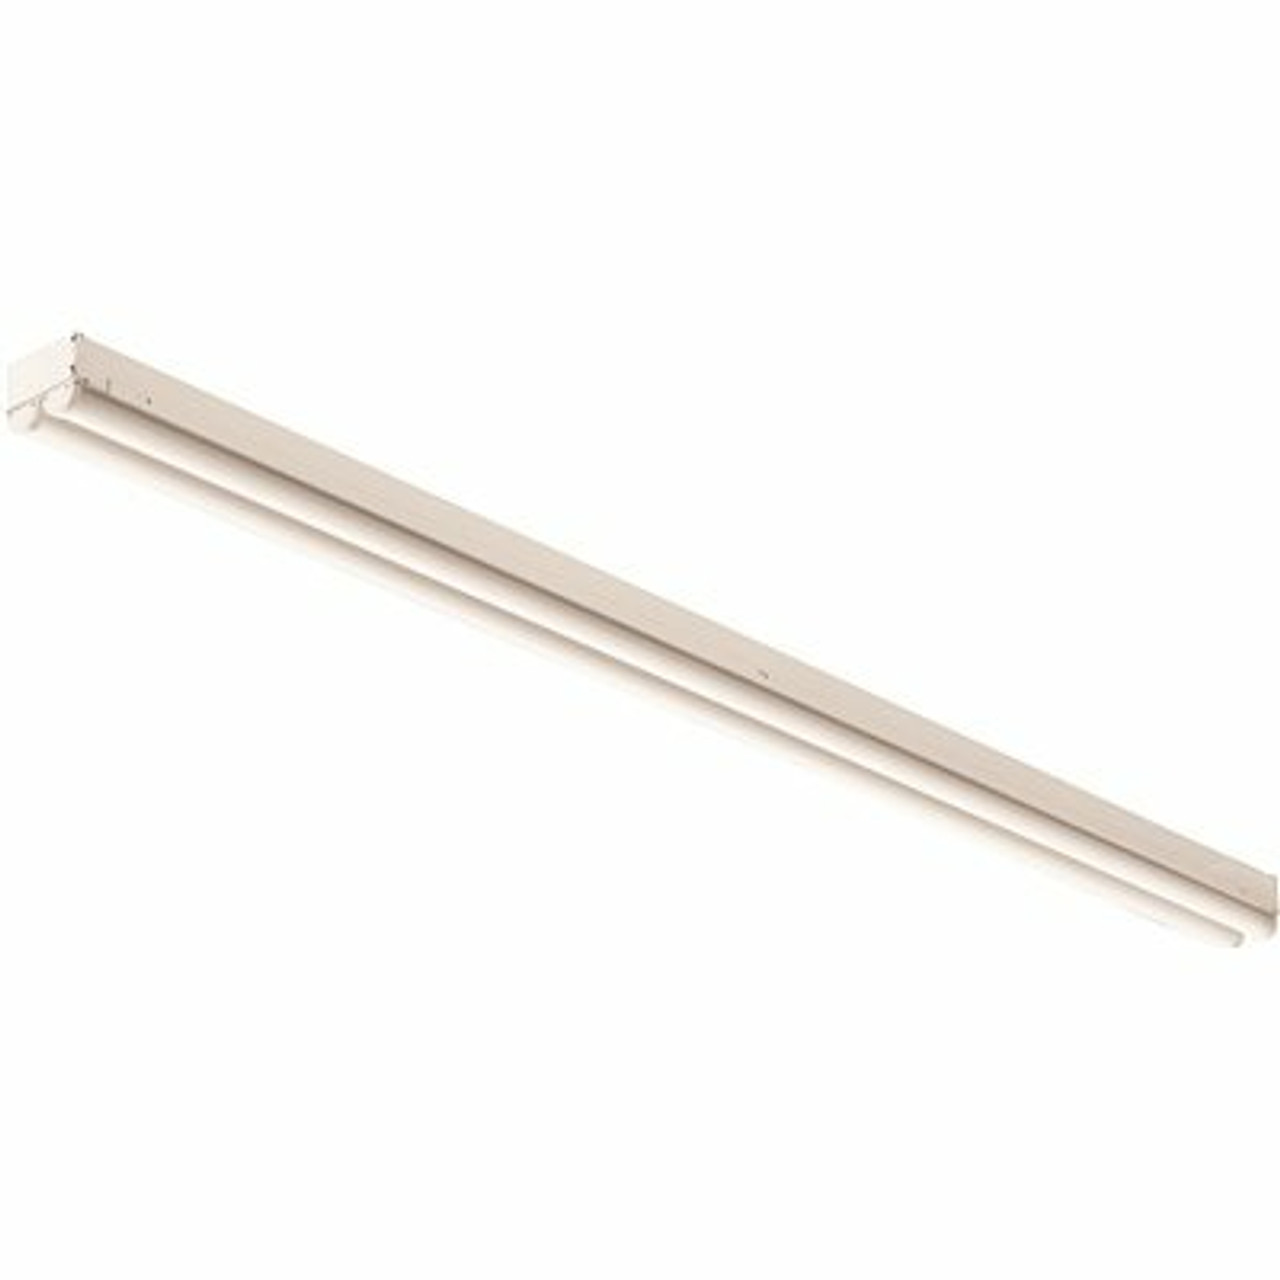 Lithonia Lighting Contractor Select Cds 4 Ft. 64-Watt Equivalent Integrated Led White 4146 Lumens 3500K Strip Light Fixture